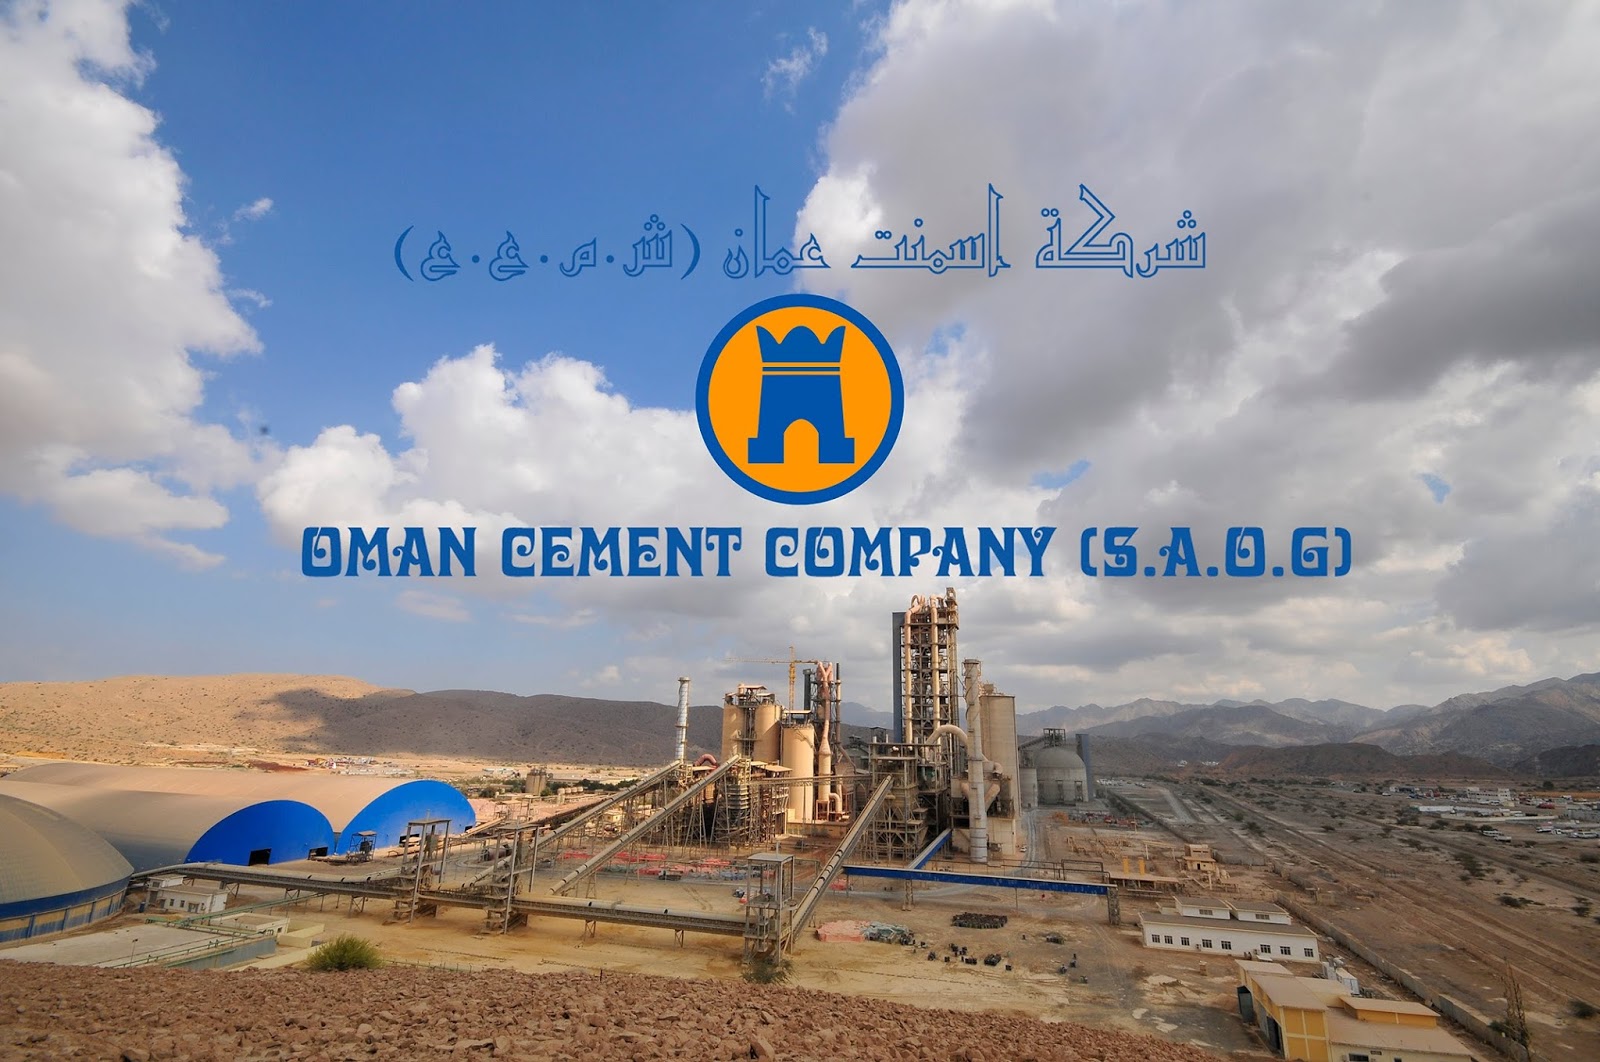 Oman Cement Company Releases Huge Notification For Freshers/Experiences